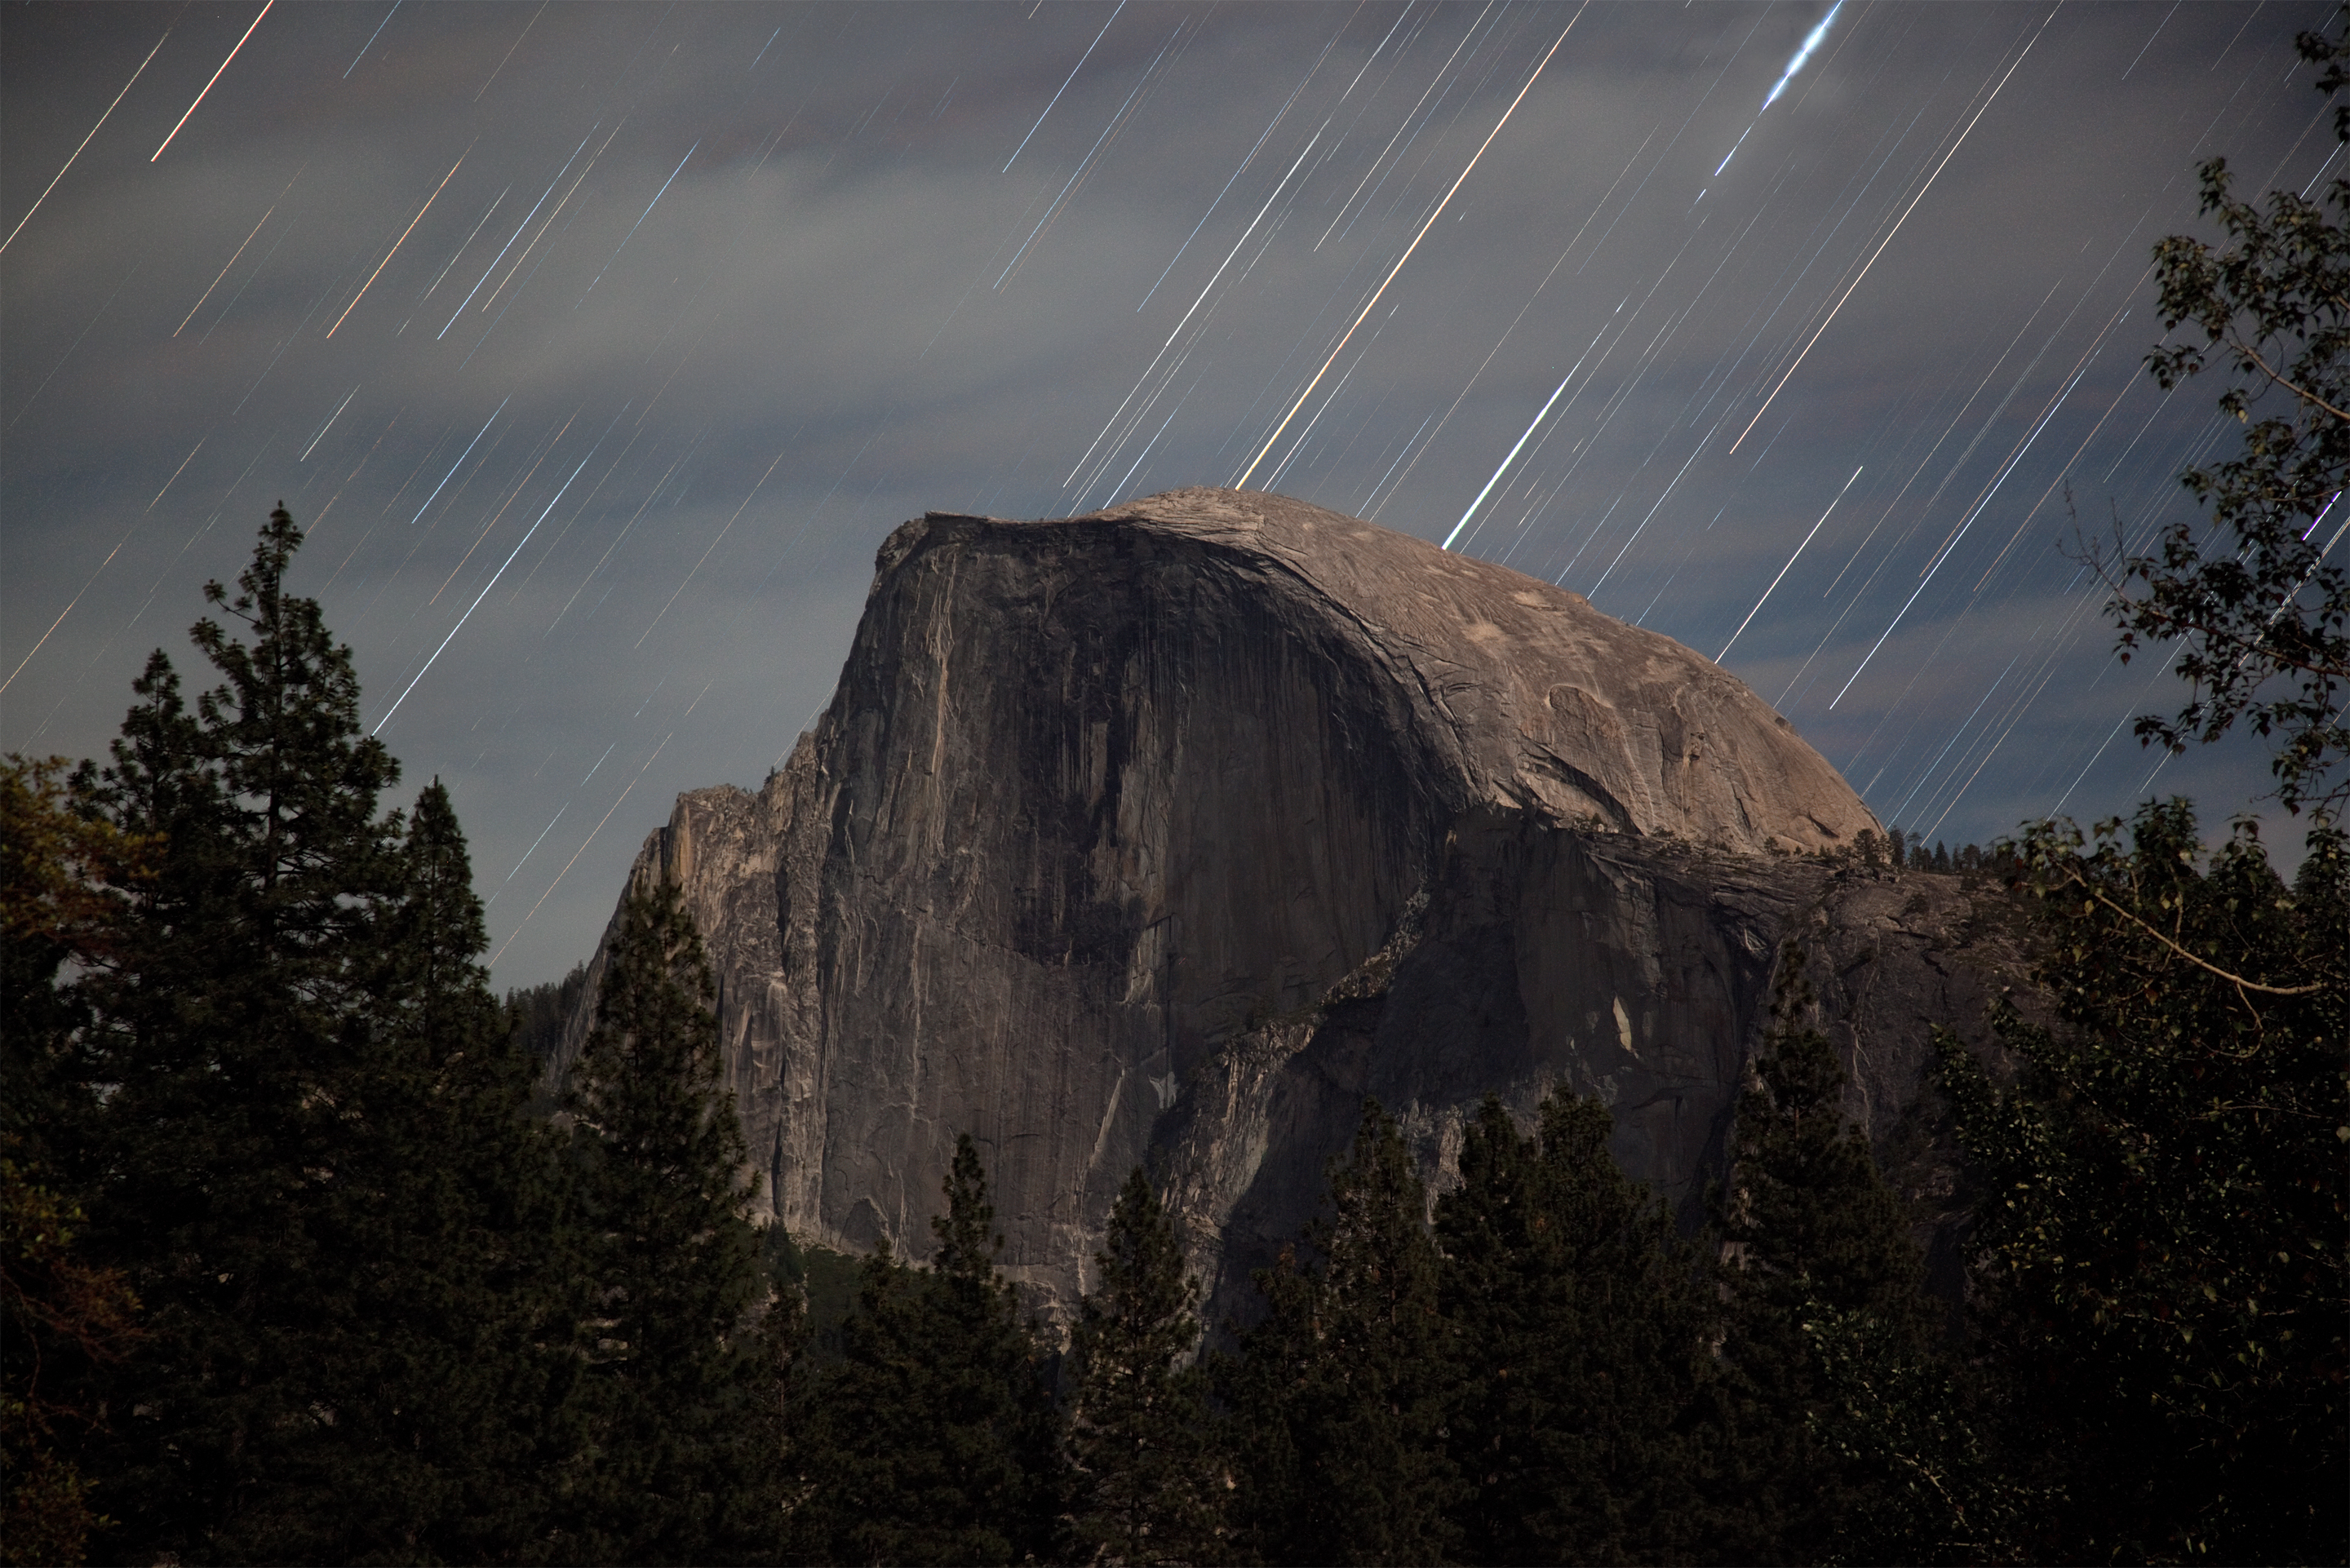 Yosemite star trail backgrounds for your iPhone, iPad or Mac | Acceleroto,  Inc.